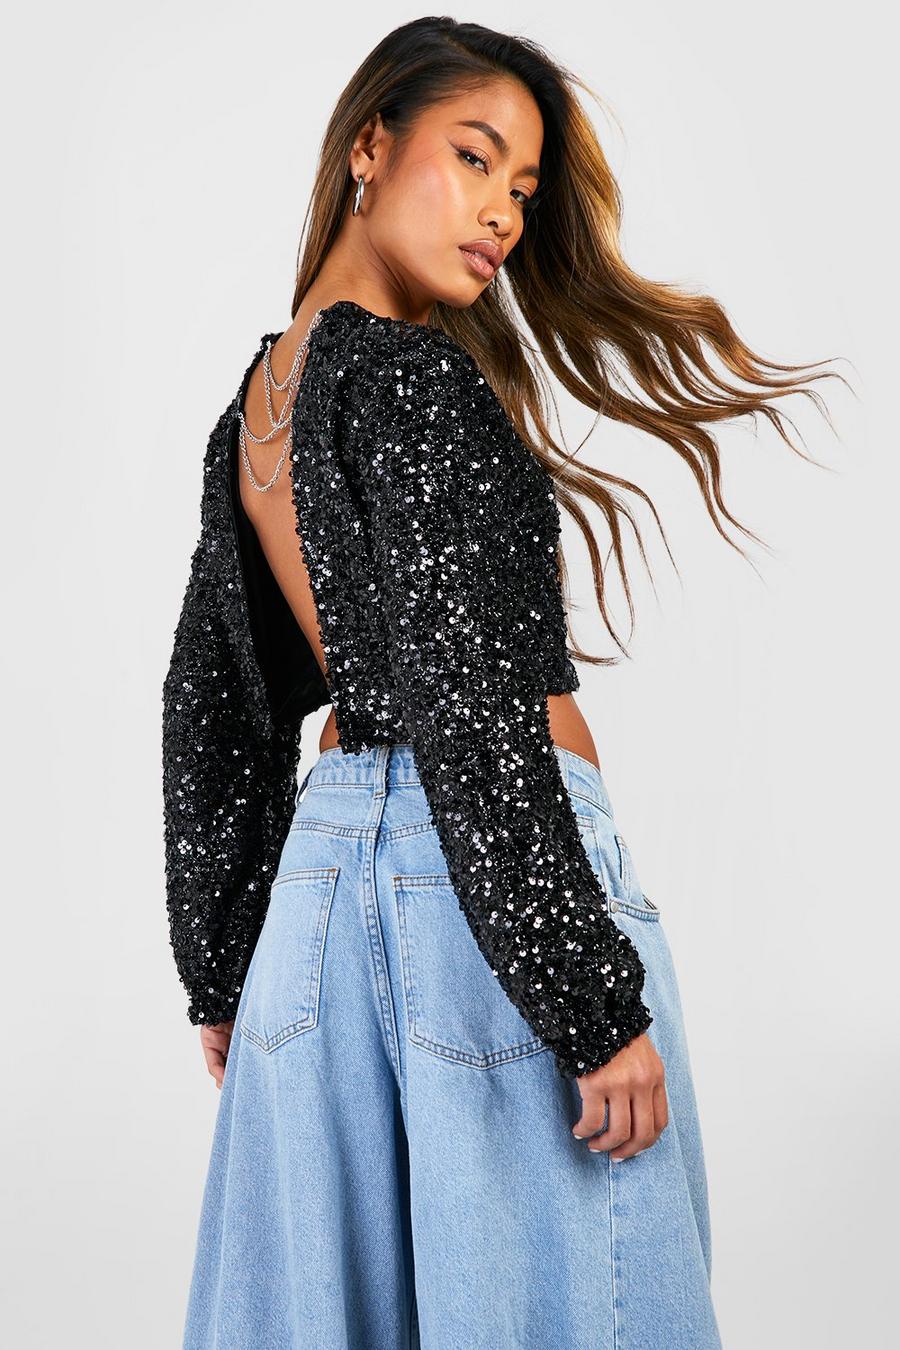 Sequin Tops for Women, Glitter & Sparkly Tops